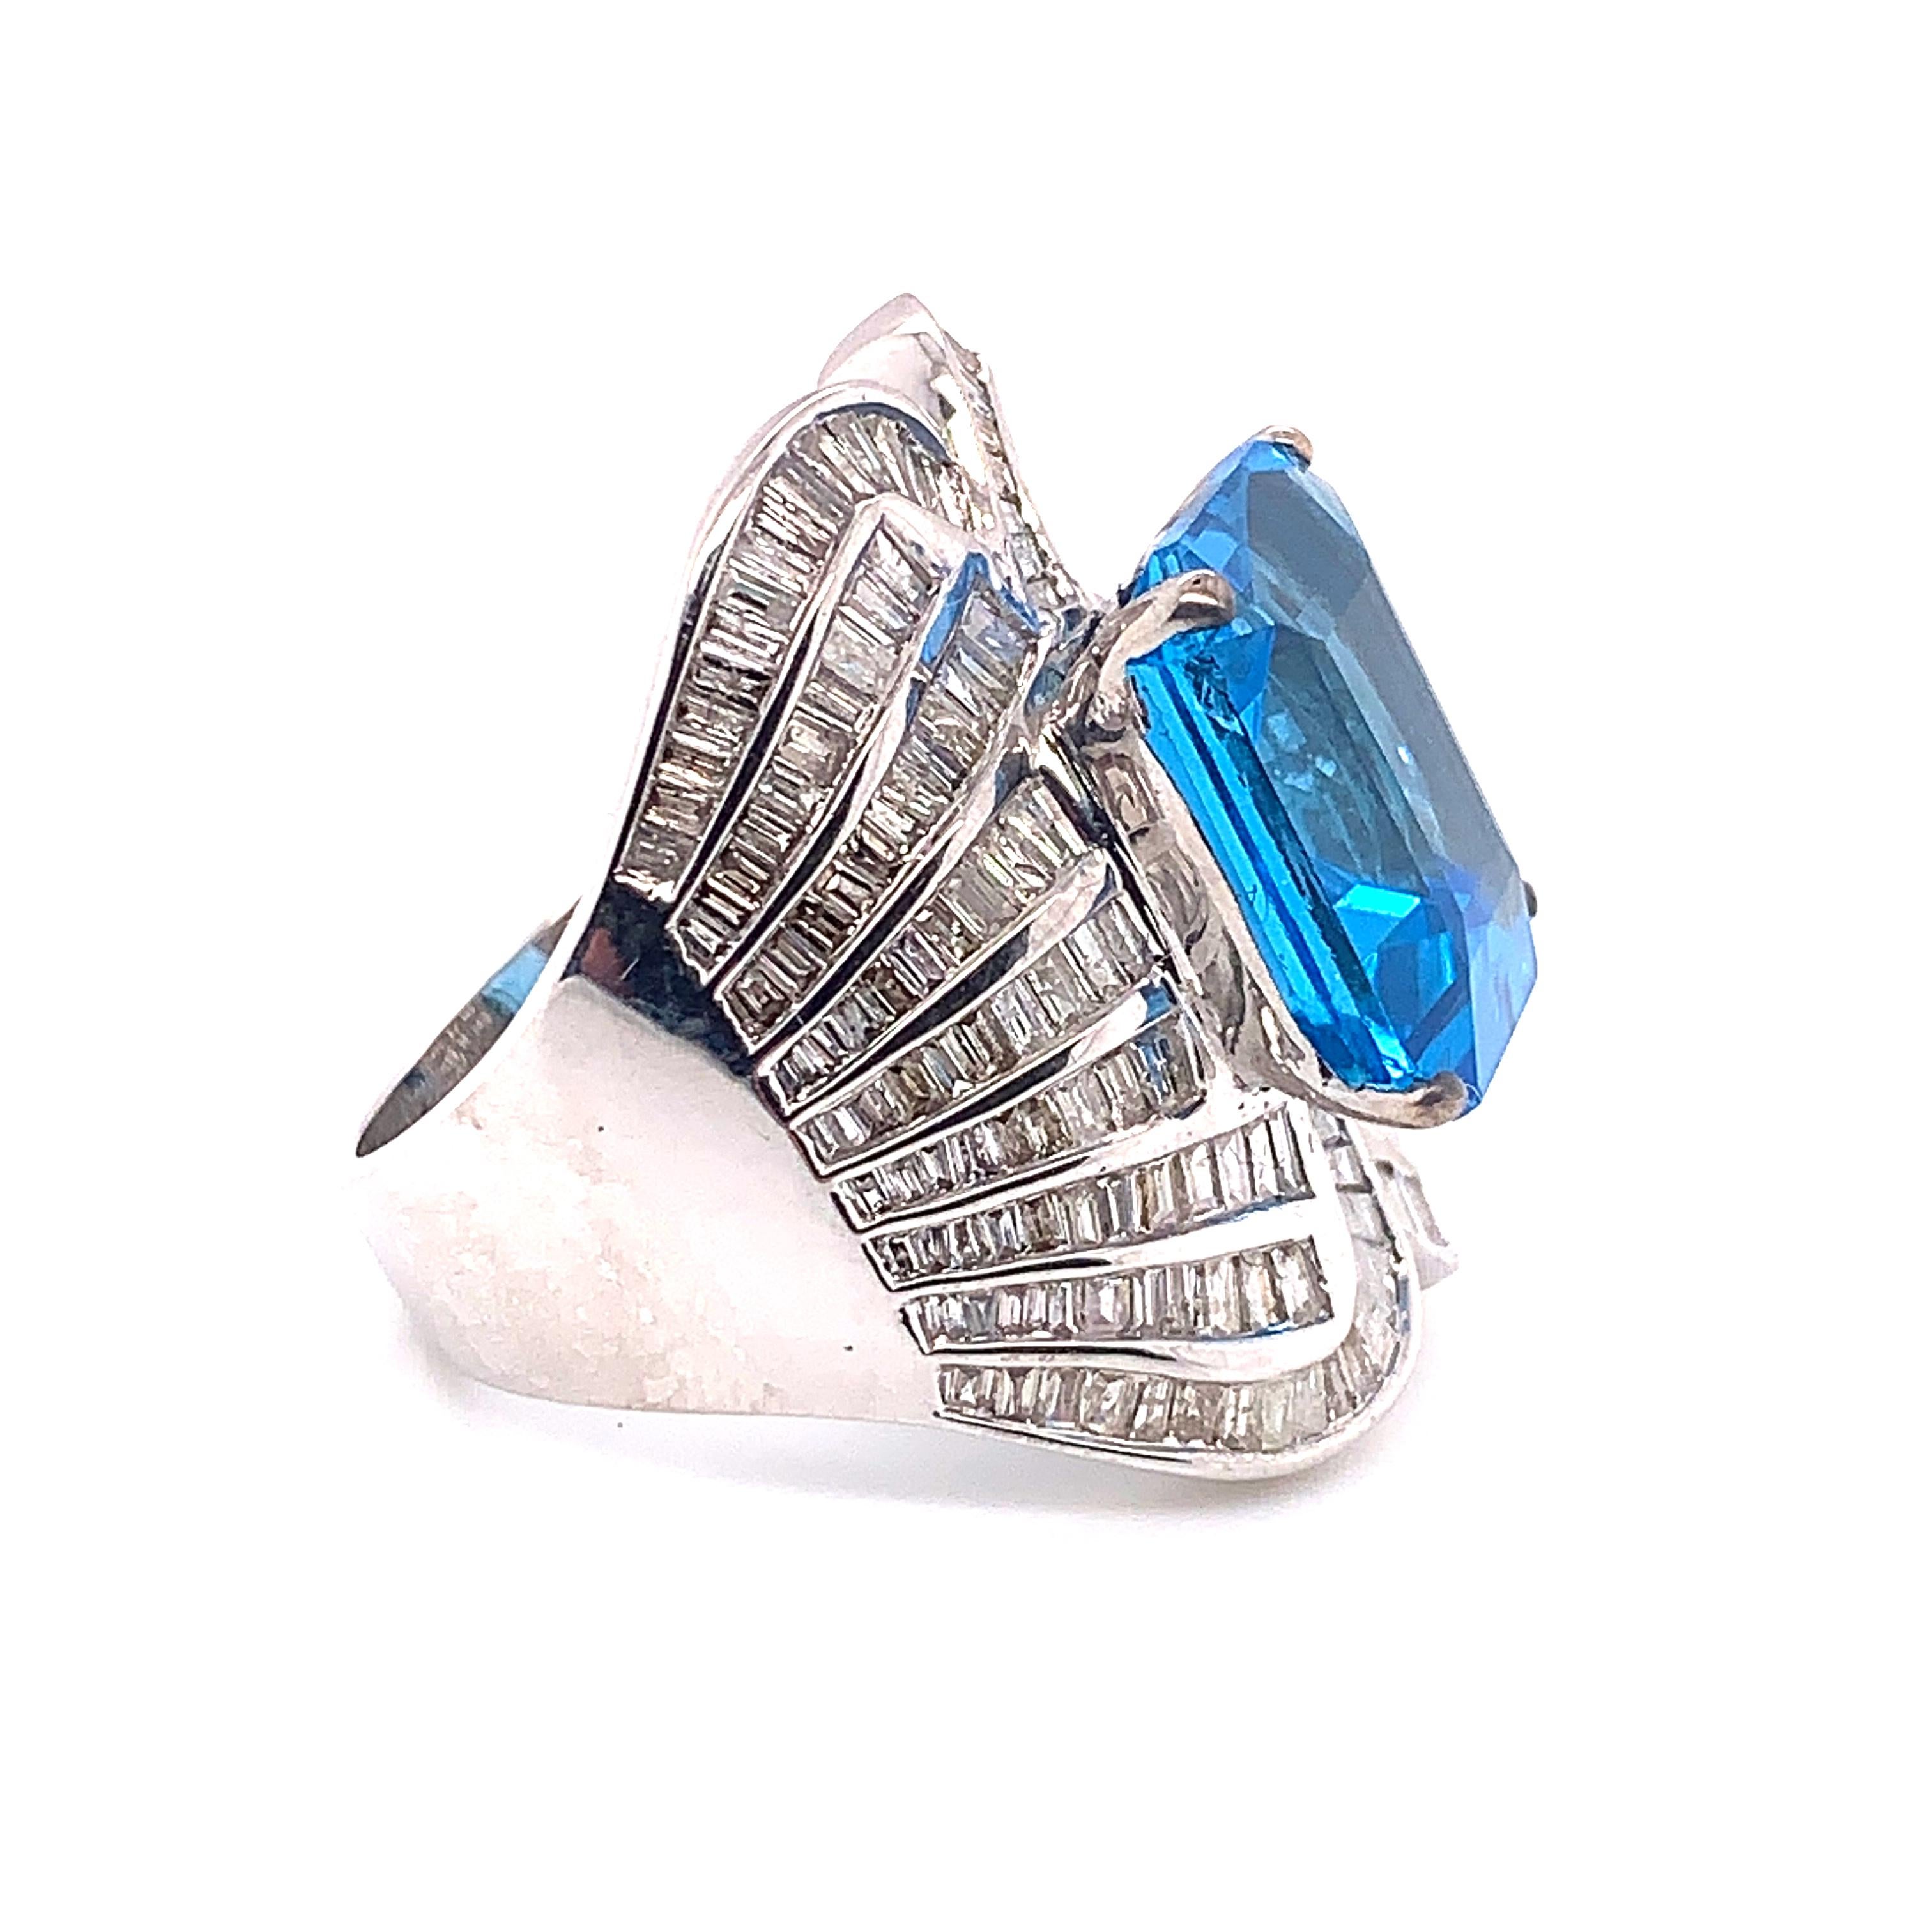 12.78 Carat Blue Topaz and Diamond ring made by Shimon's Creations. Featuring a Bright and happy 10.53 carat topaz and 2.25 Carat stunning white diamonds in 18k white gold.

Color Stone And Diamond Breakdown:
Blue Topaz - 10.53 Carat
White Diamond -